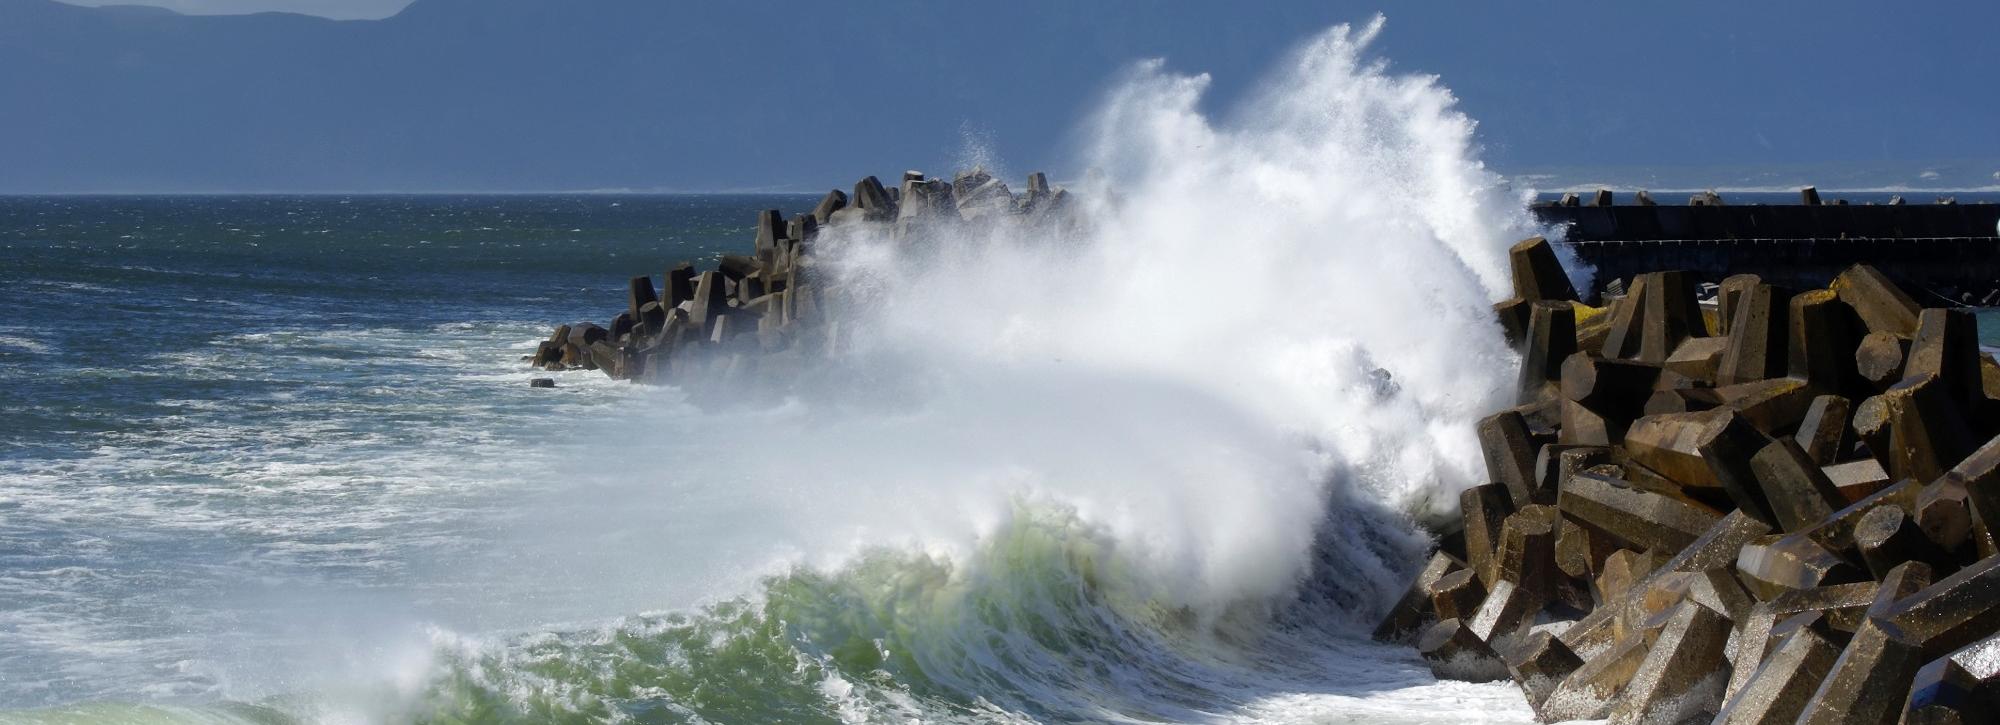 Wave action on coastal structures